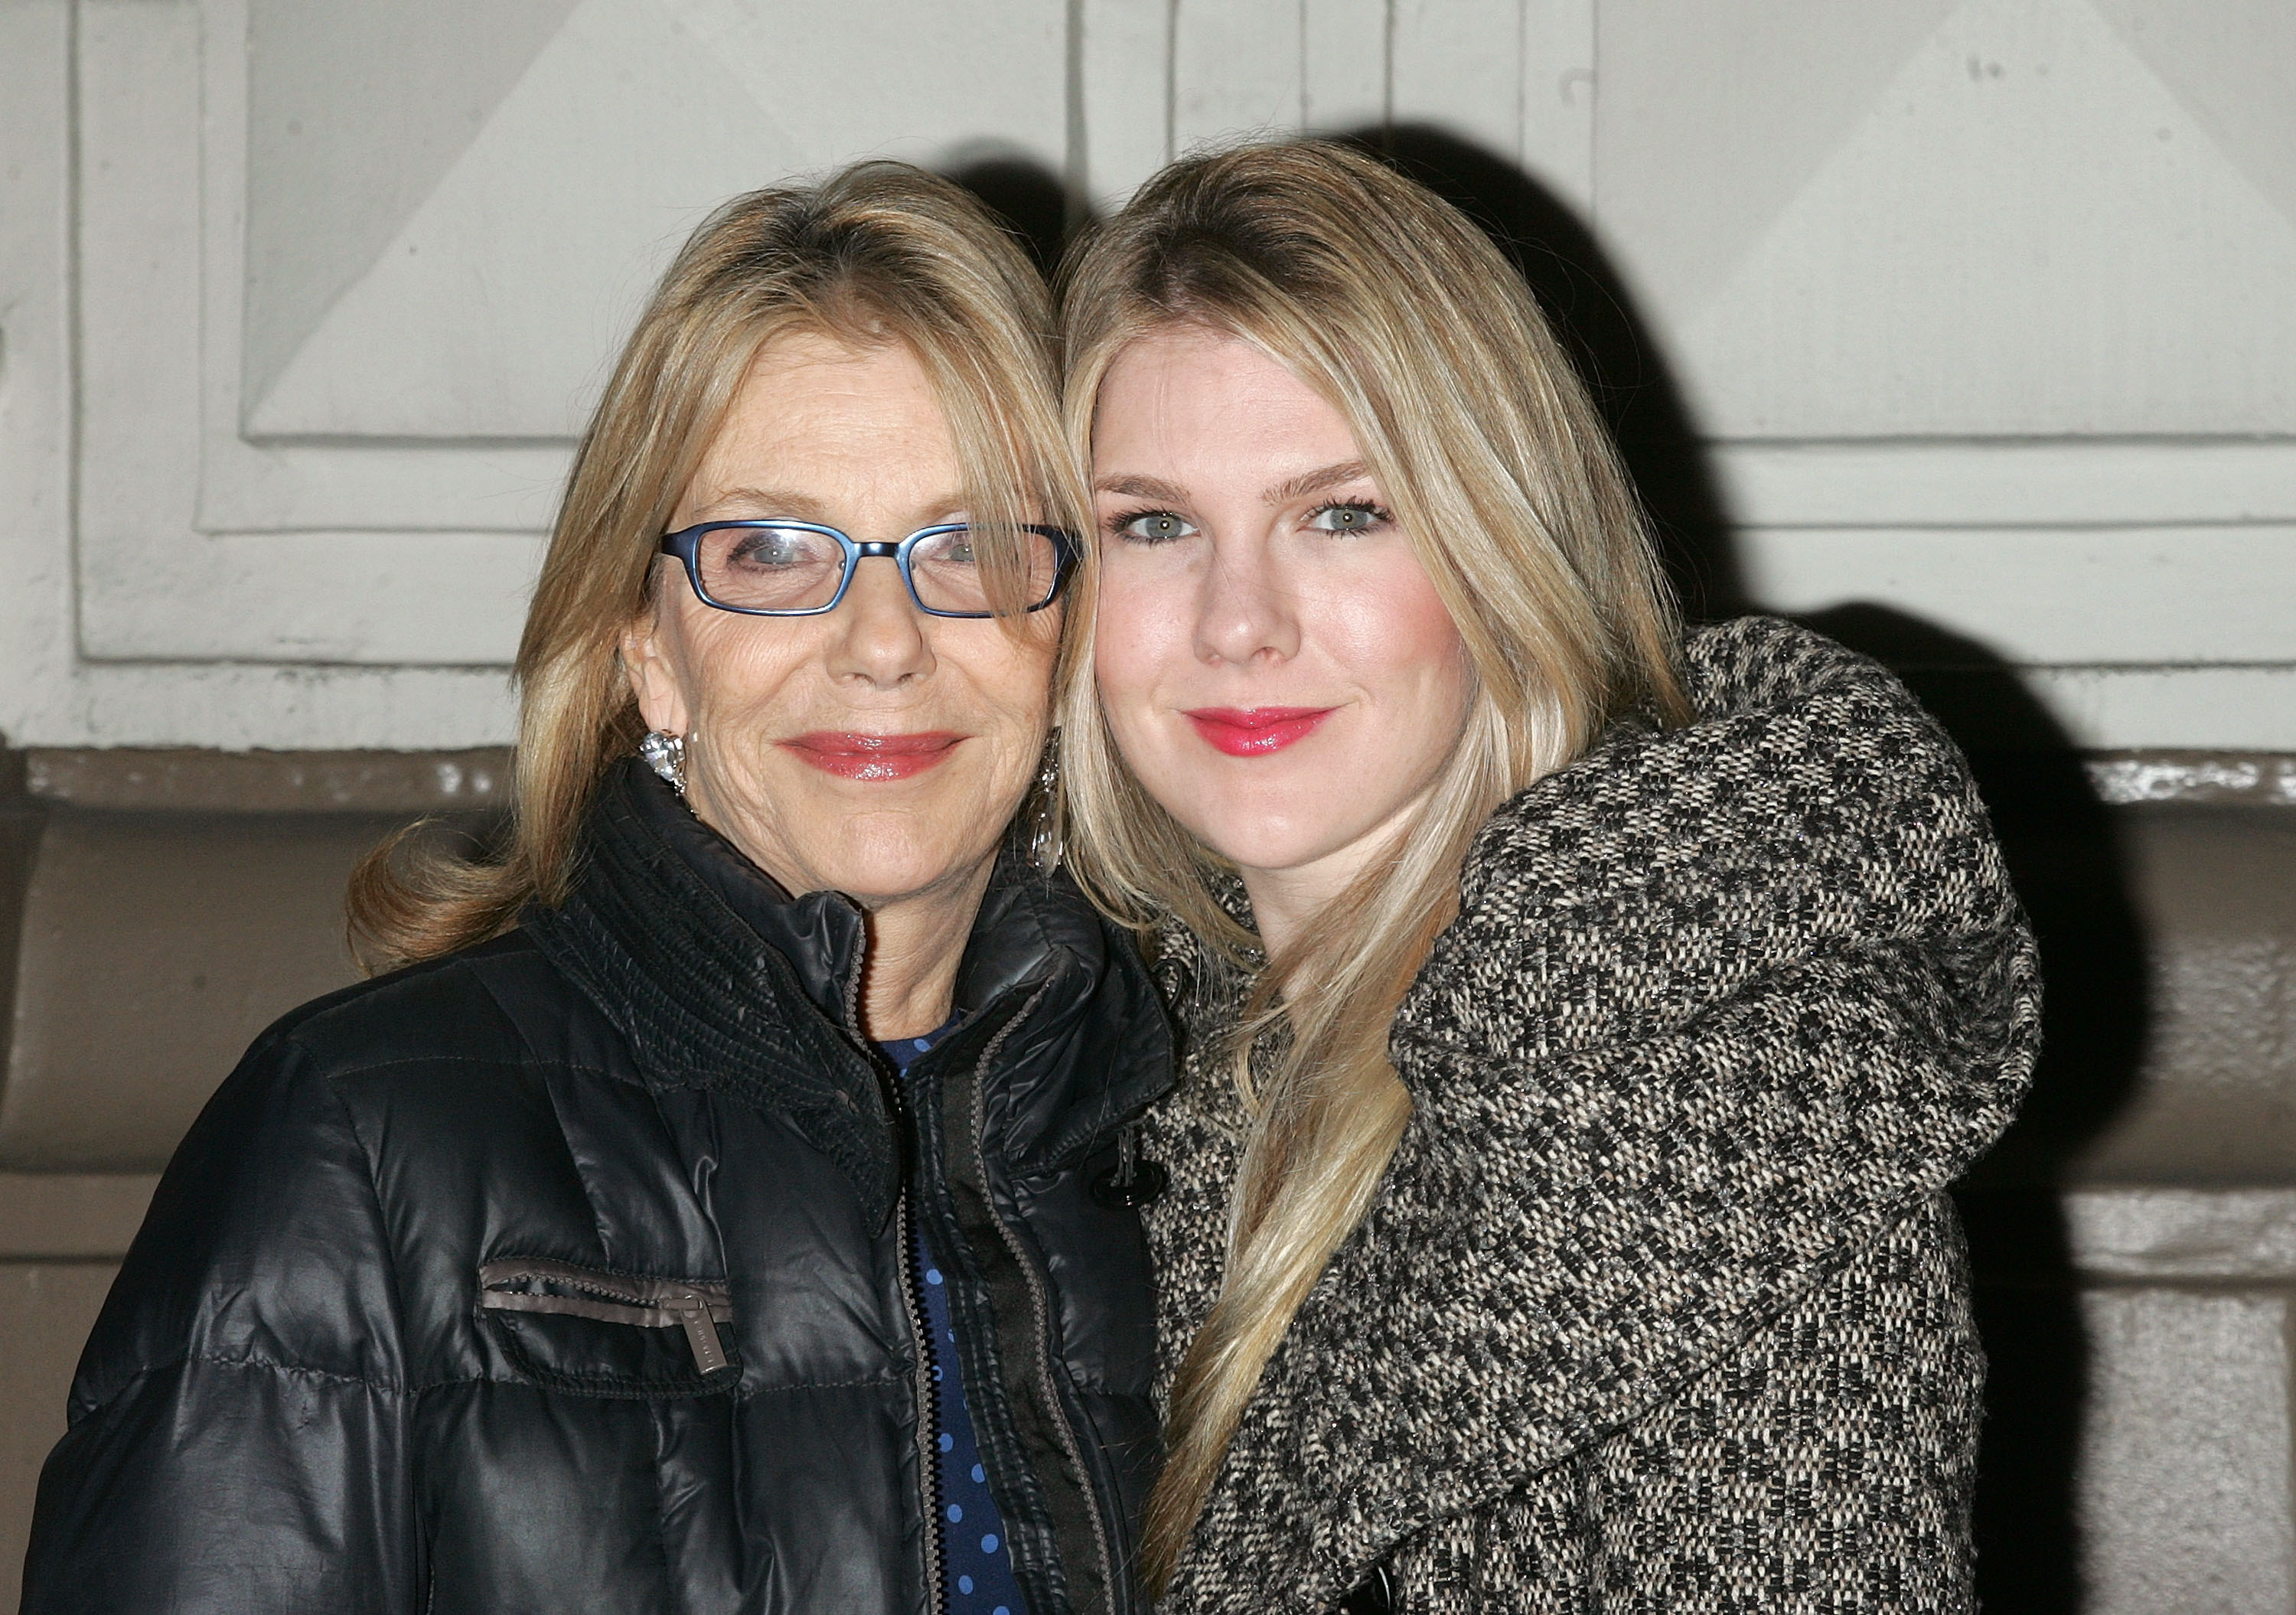 Jill Clayburgh and Lily Rabe